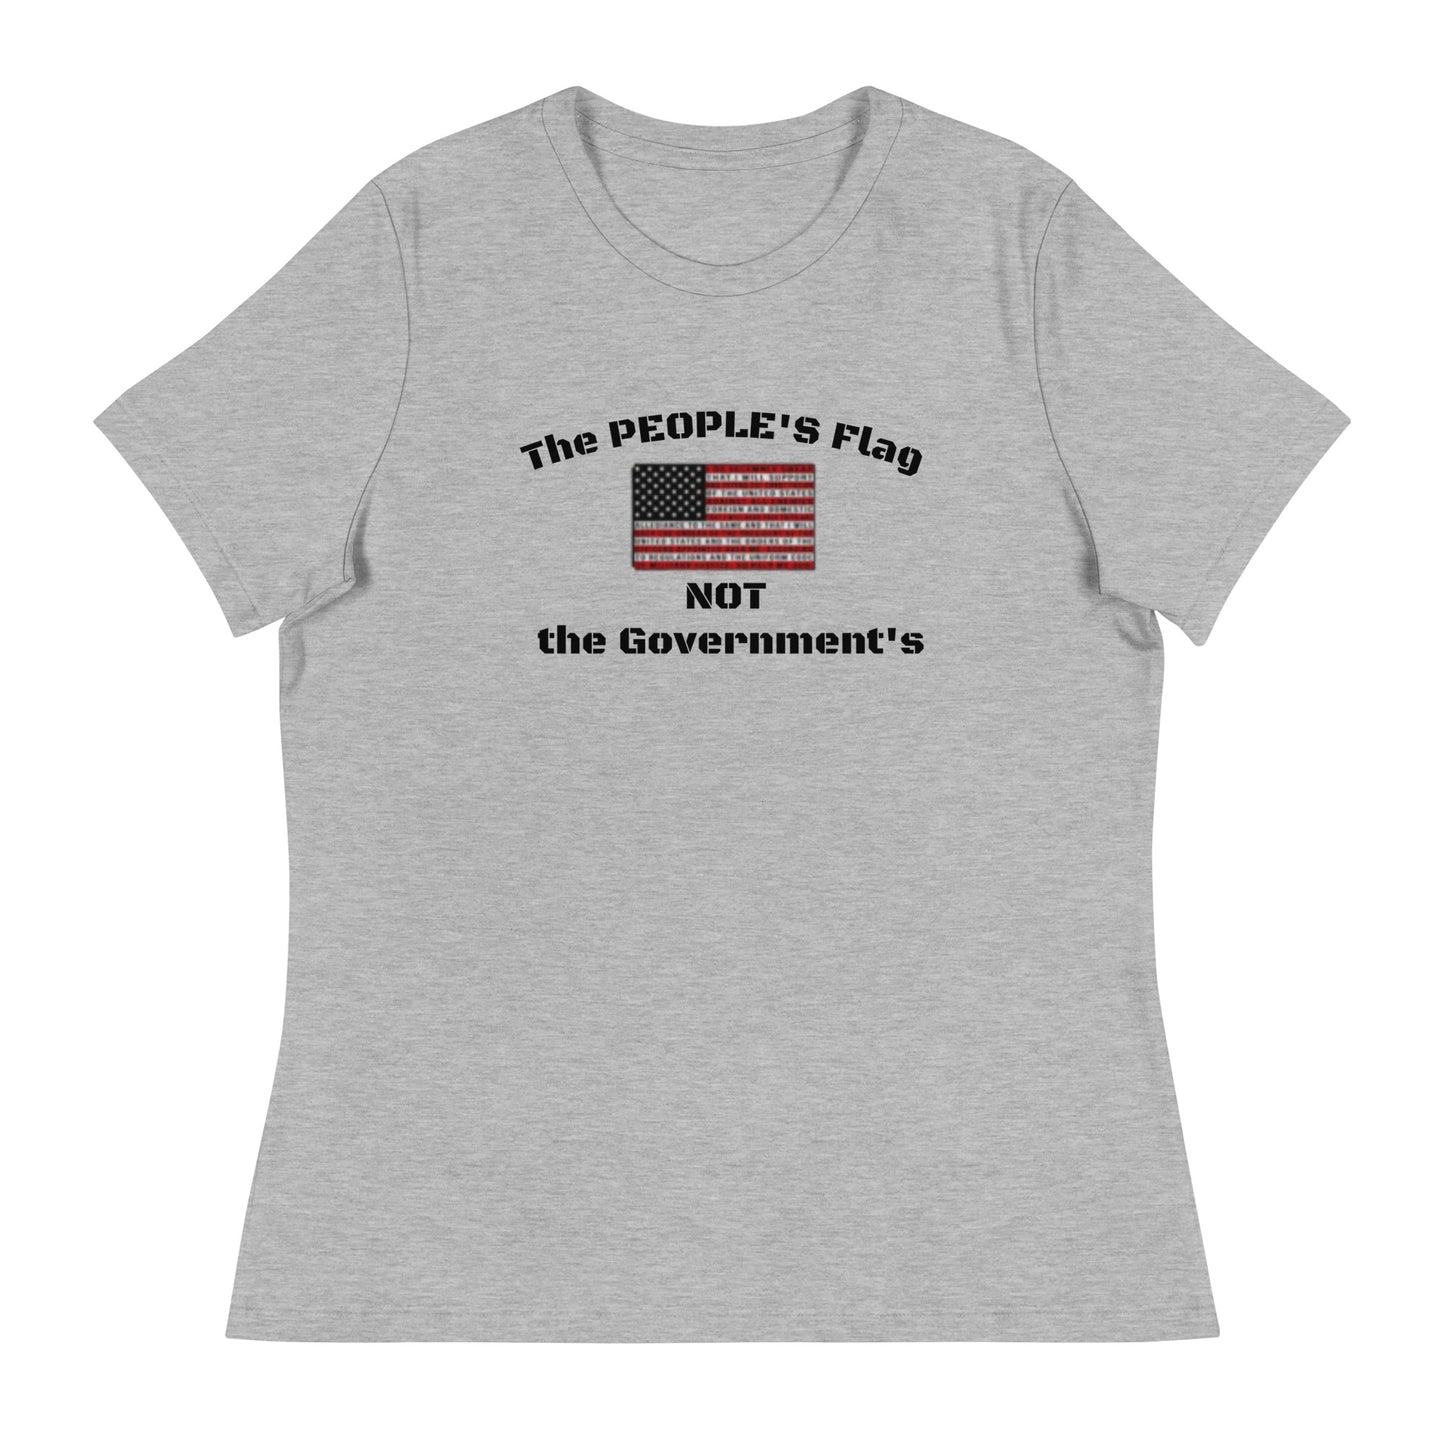 The PEOPLE'S Flag, NOT the Government's Women's Relaxed T-Shirt